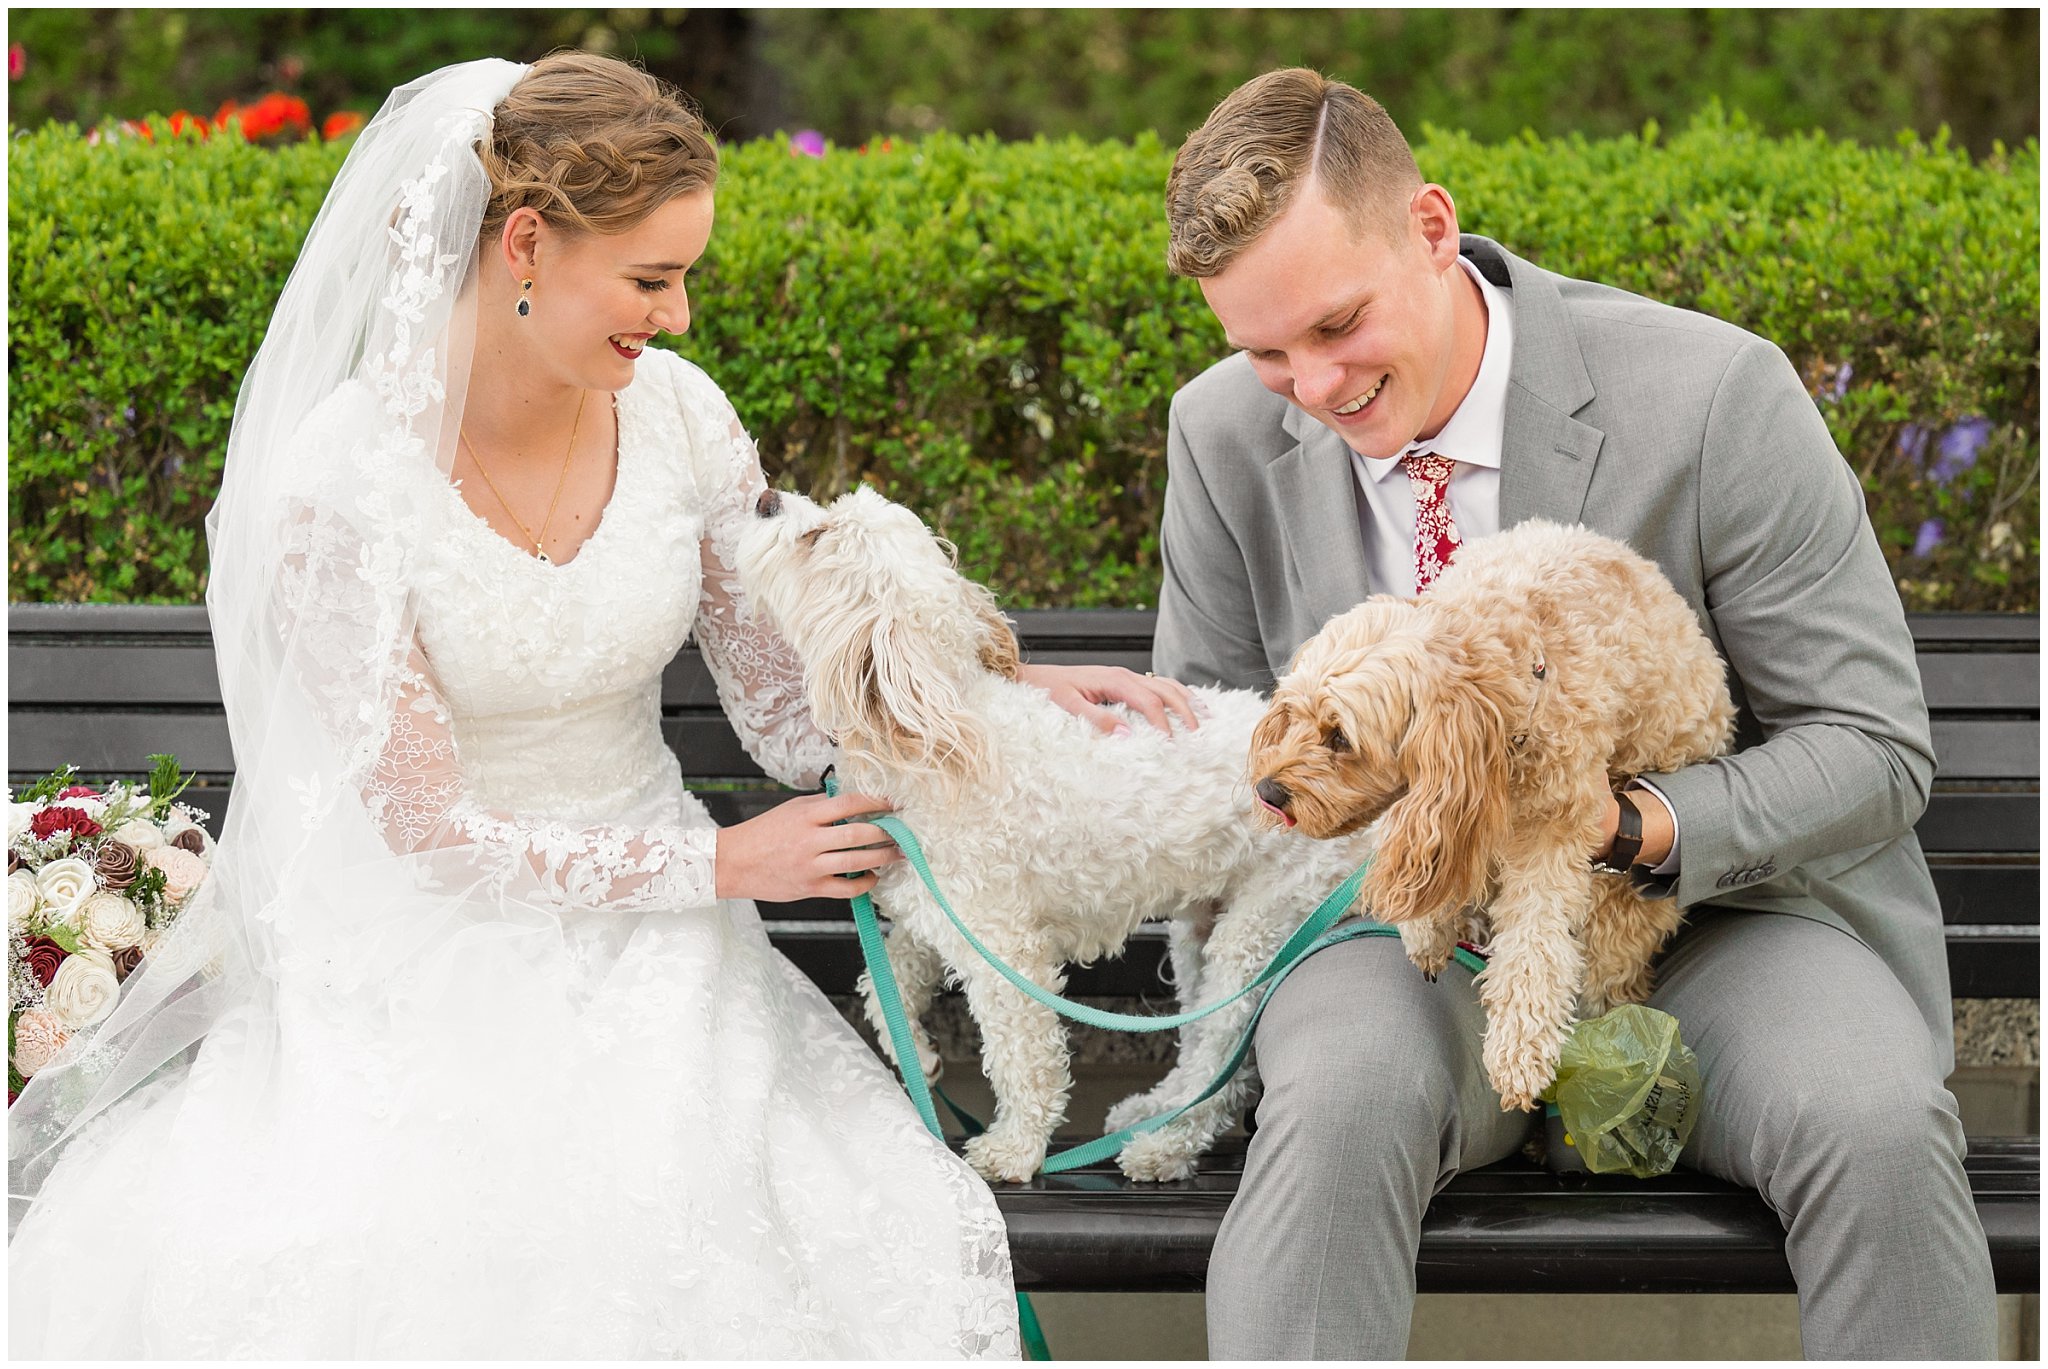 Bride and groom with long cathedral length veil sharing moments with their dogs | Sunset Utah State Capitol Wedding Formal Session | Jessie and Dallin Photography